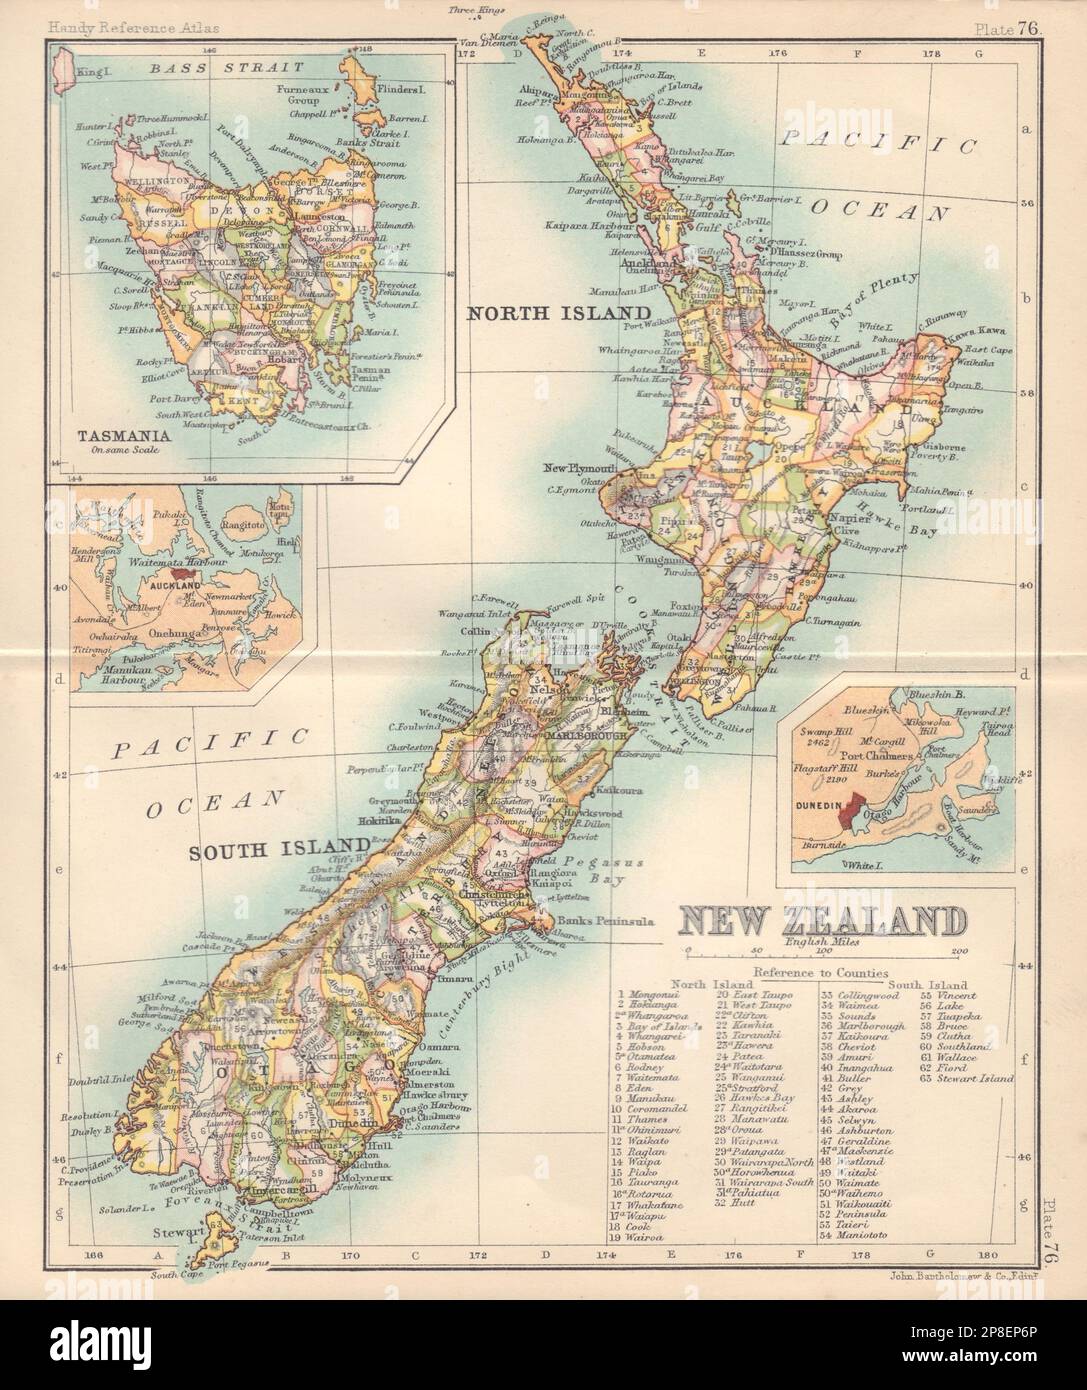 New Zealand showing counties. Inset Tasmania Auckland Dunedin 1898 old map Stock Photo